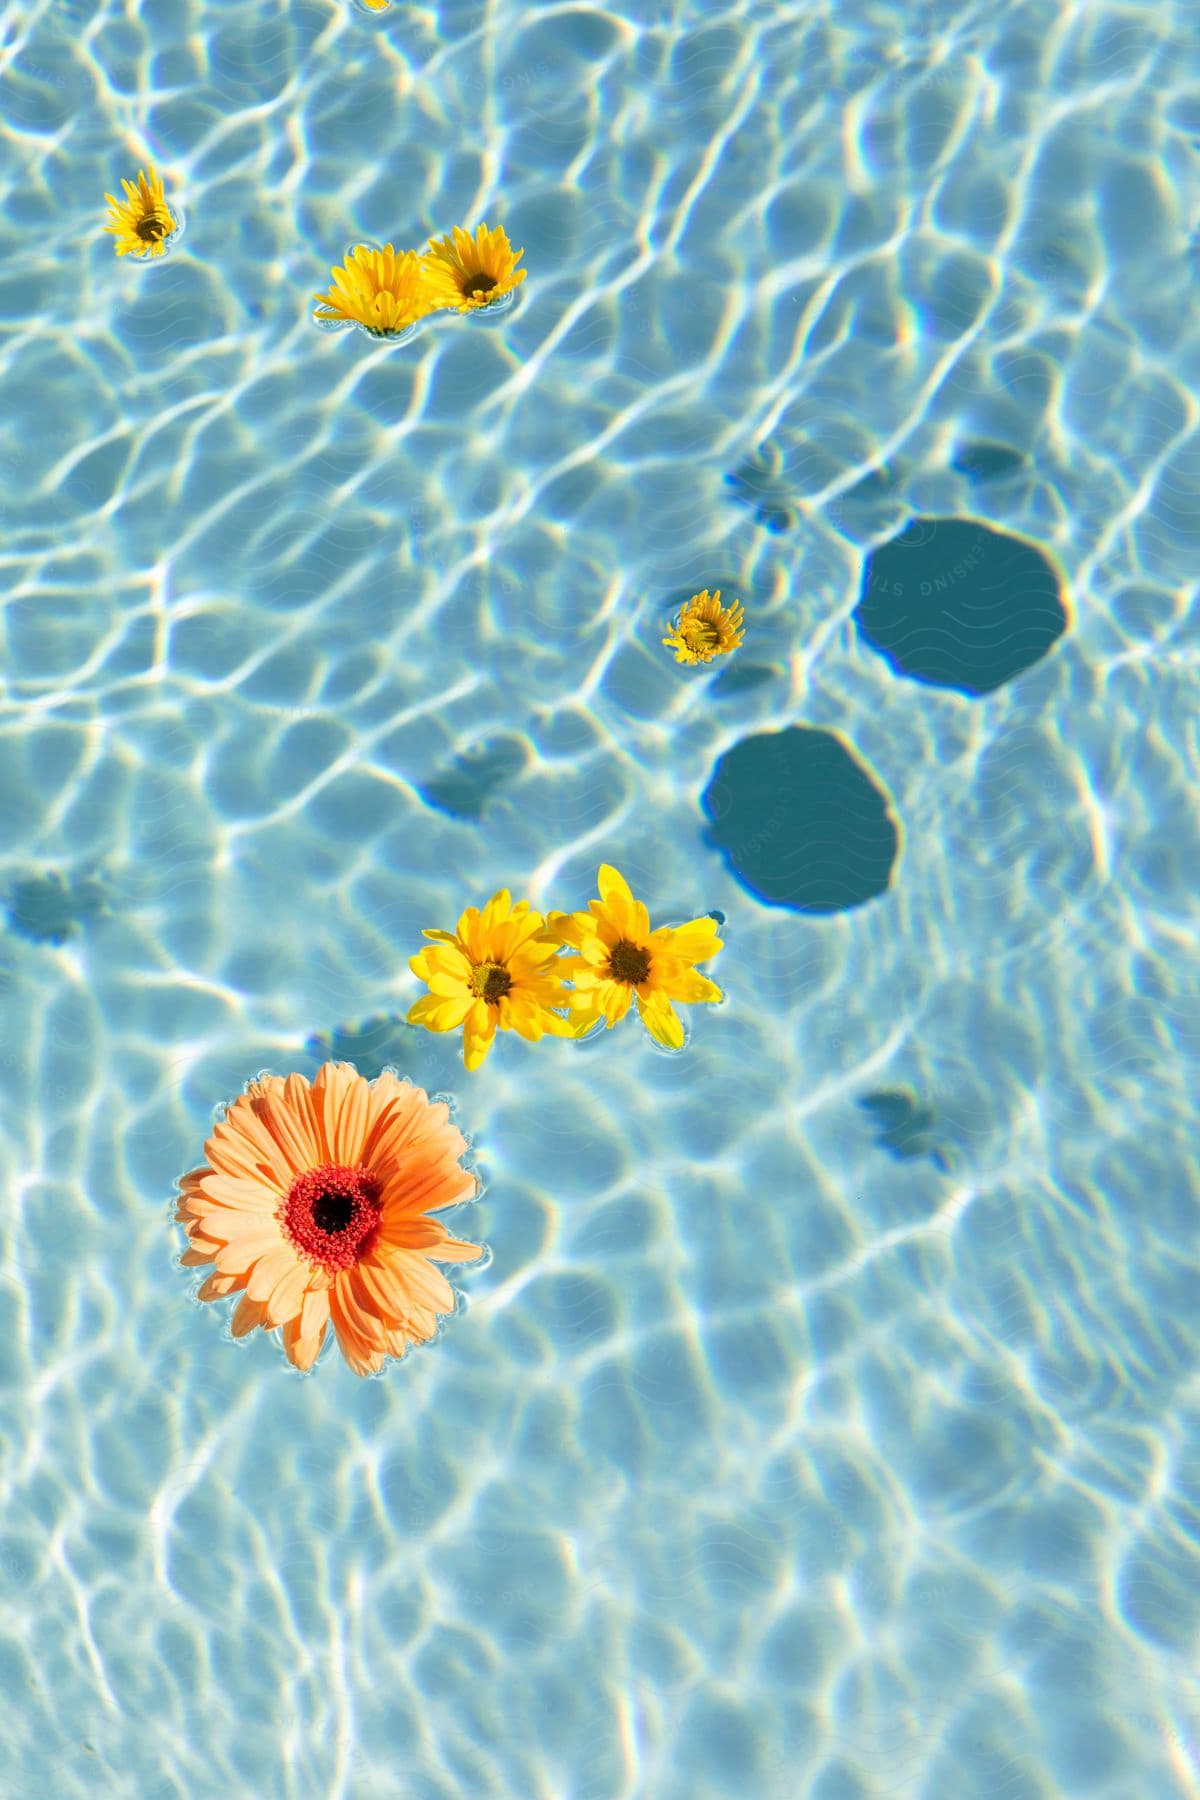 Several flowers float on top of a clear blue pool